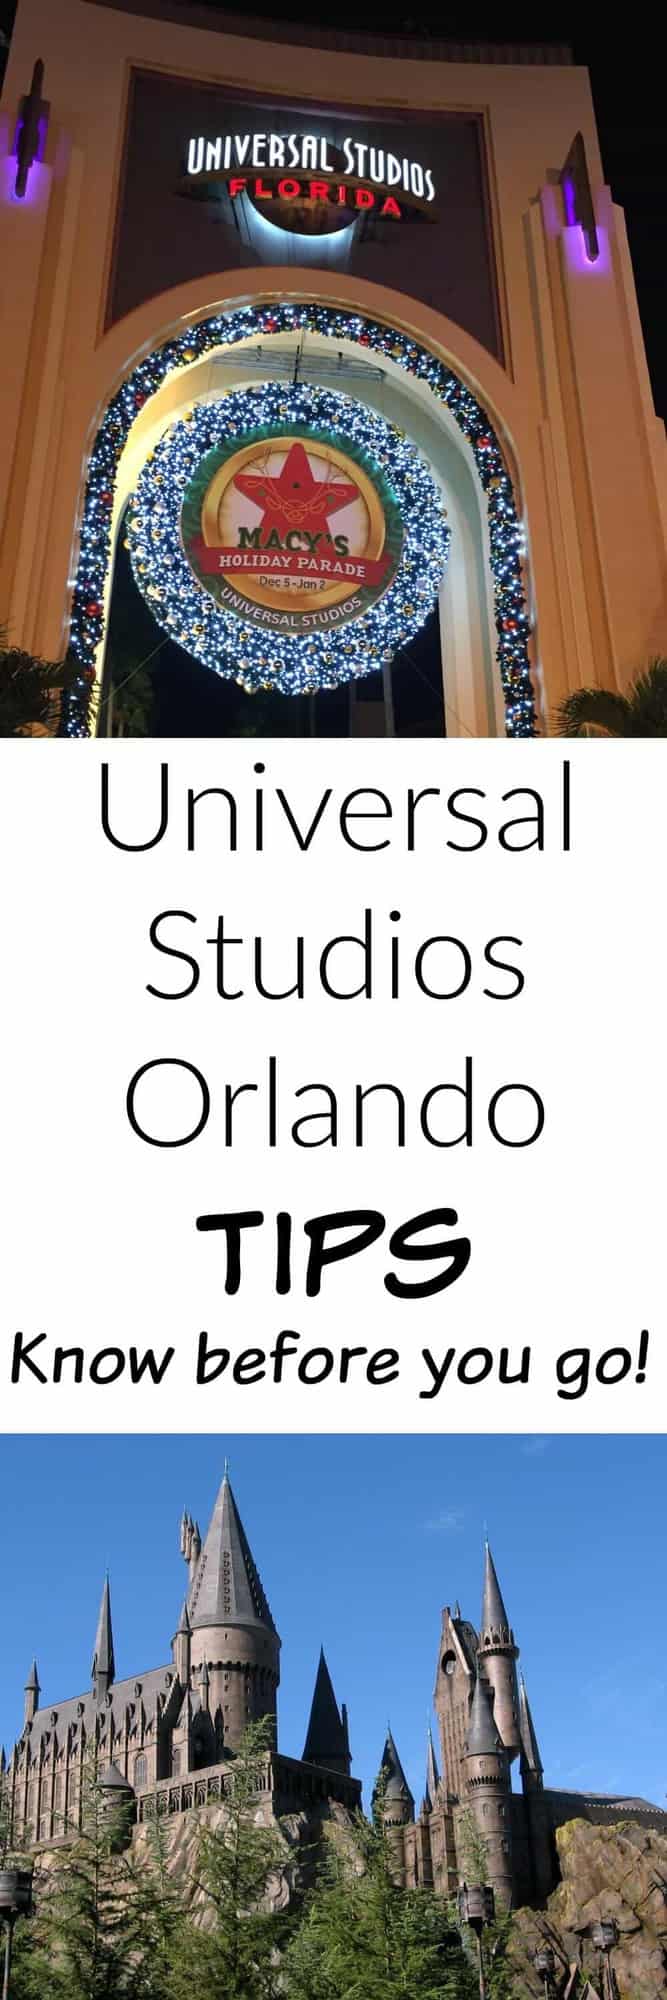 Universal Studios Orlando Tips - things to know before you go!